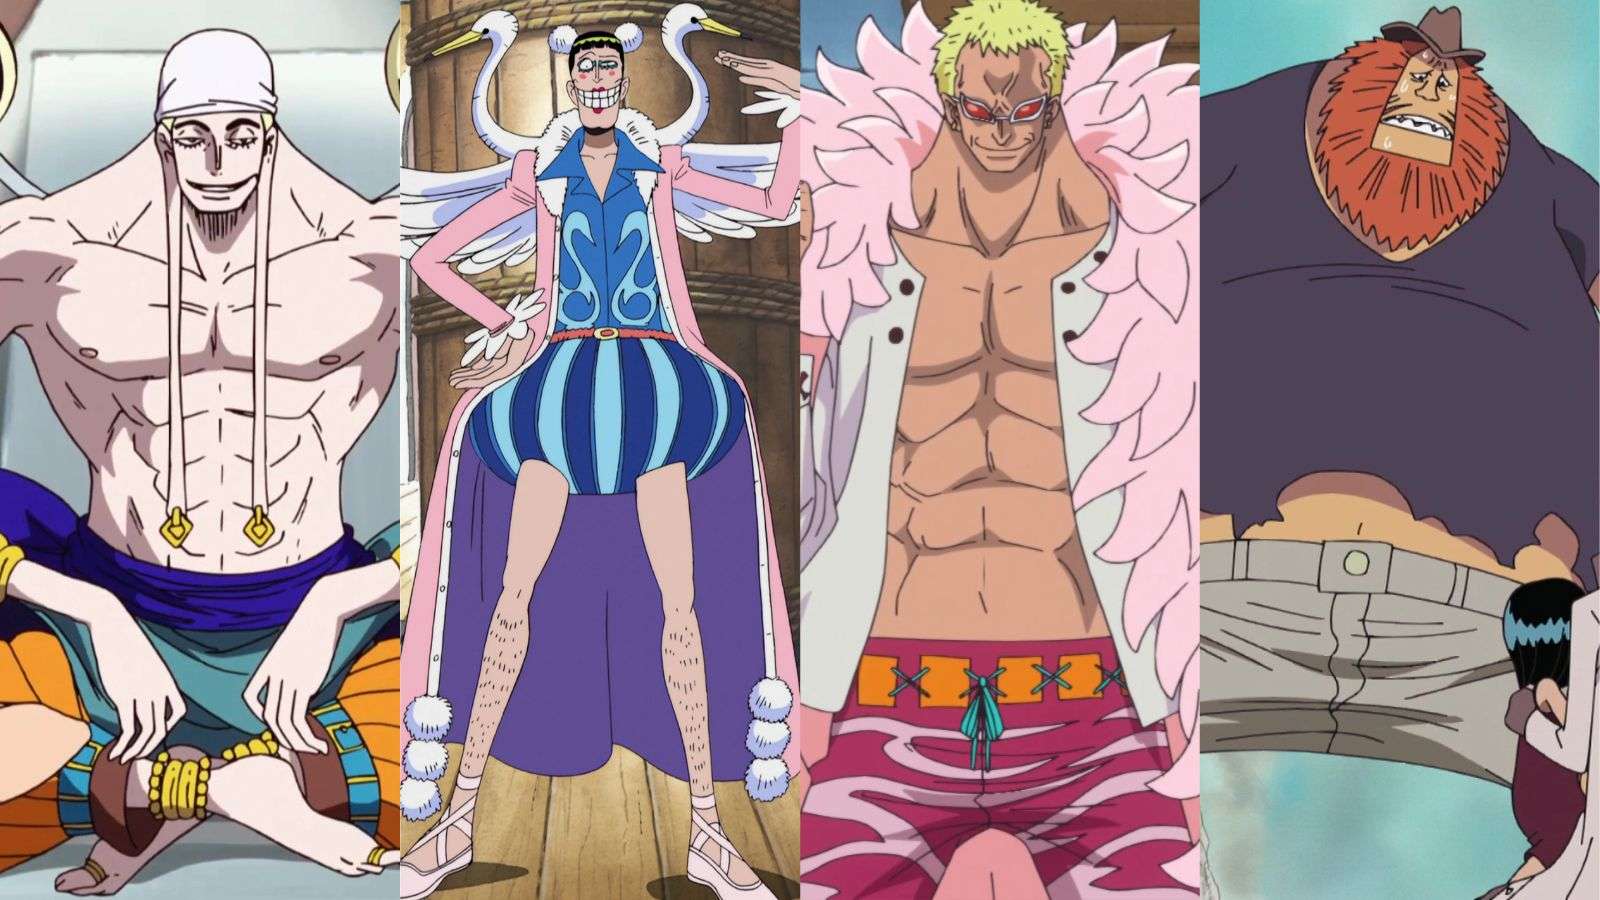 An image featuring One Piece characters